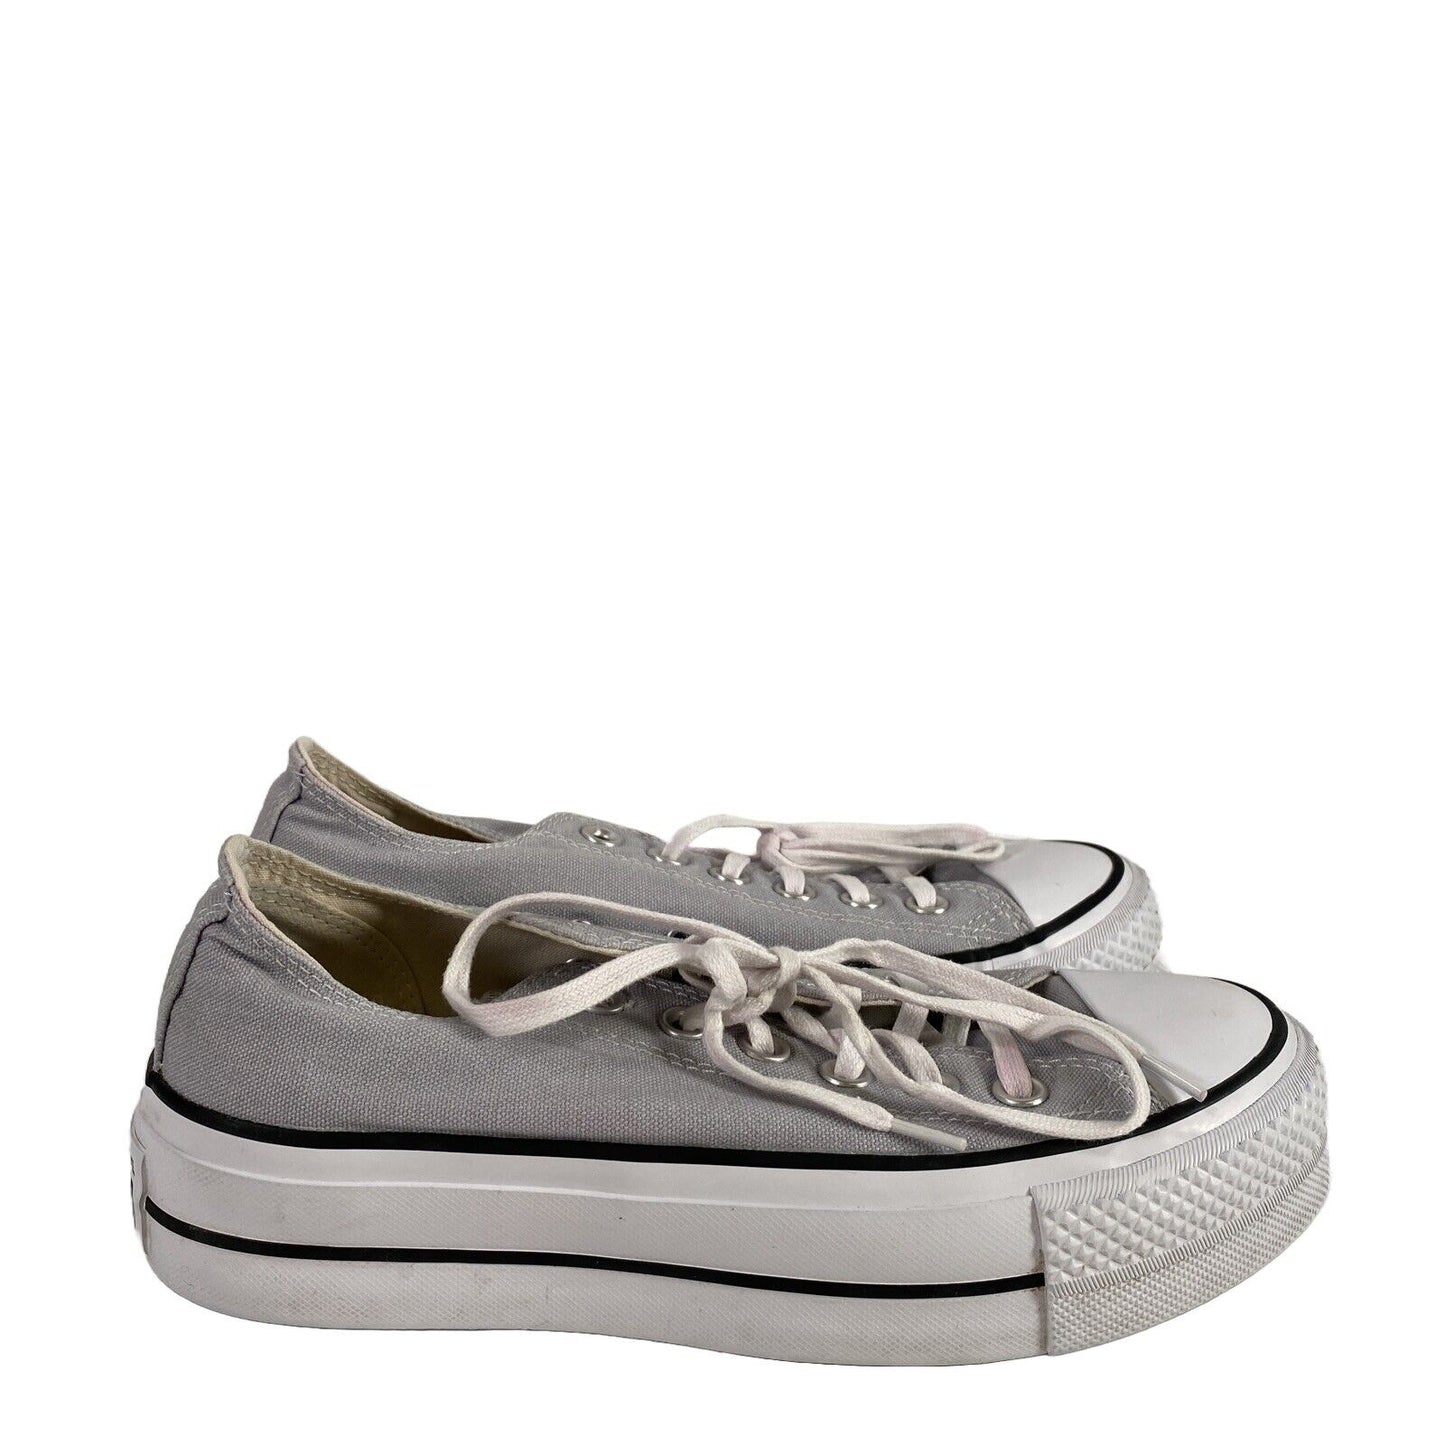 Converse All Star Women's Gray Canvas Lace Up Platform Sneakers - 6